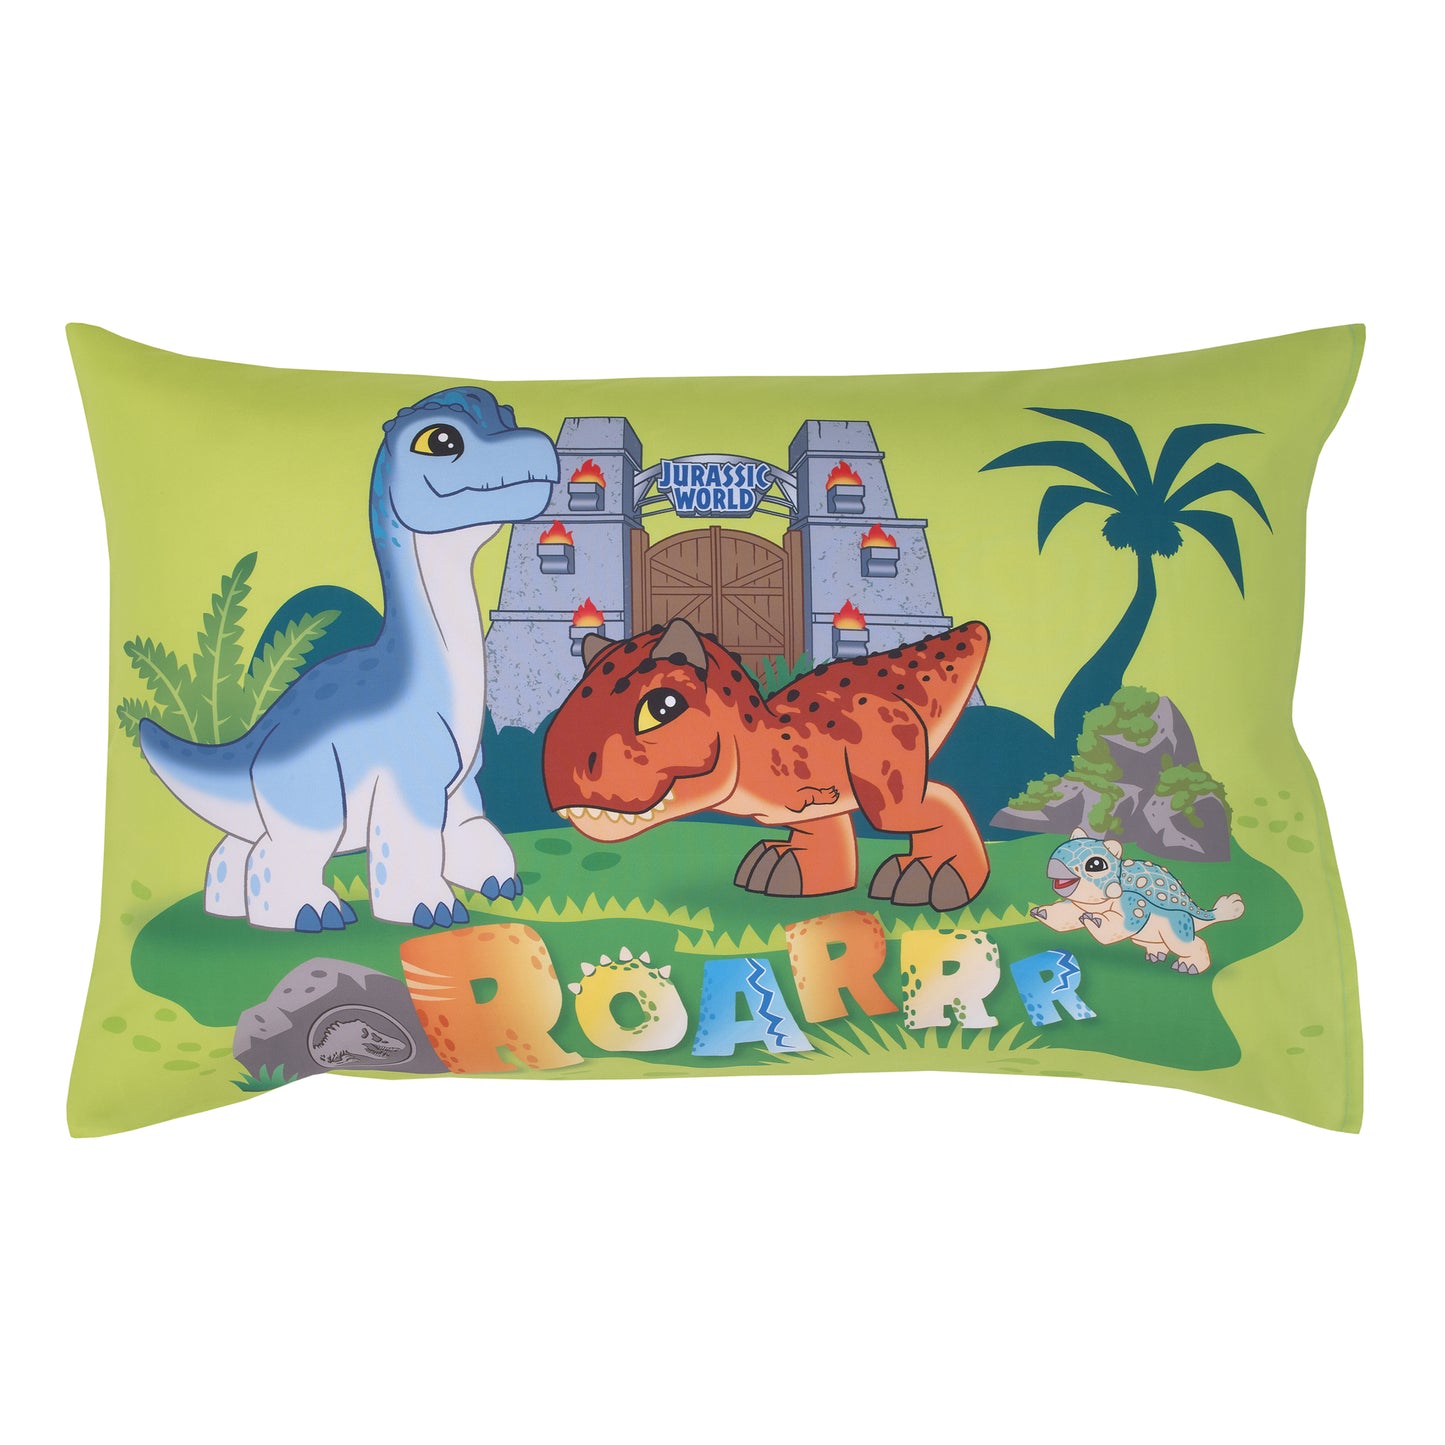 Universal Jurassic World Explorers Welcome to Jurassic World, Green, Blue, and Tan Dinosaur 4 Piece Toddler Bed Set - Comforter, Fitted Bottom Sheet, Flat Top Sheet, and Reversible Pillowcase